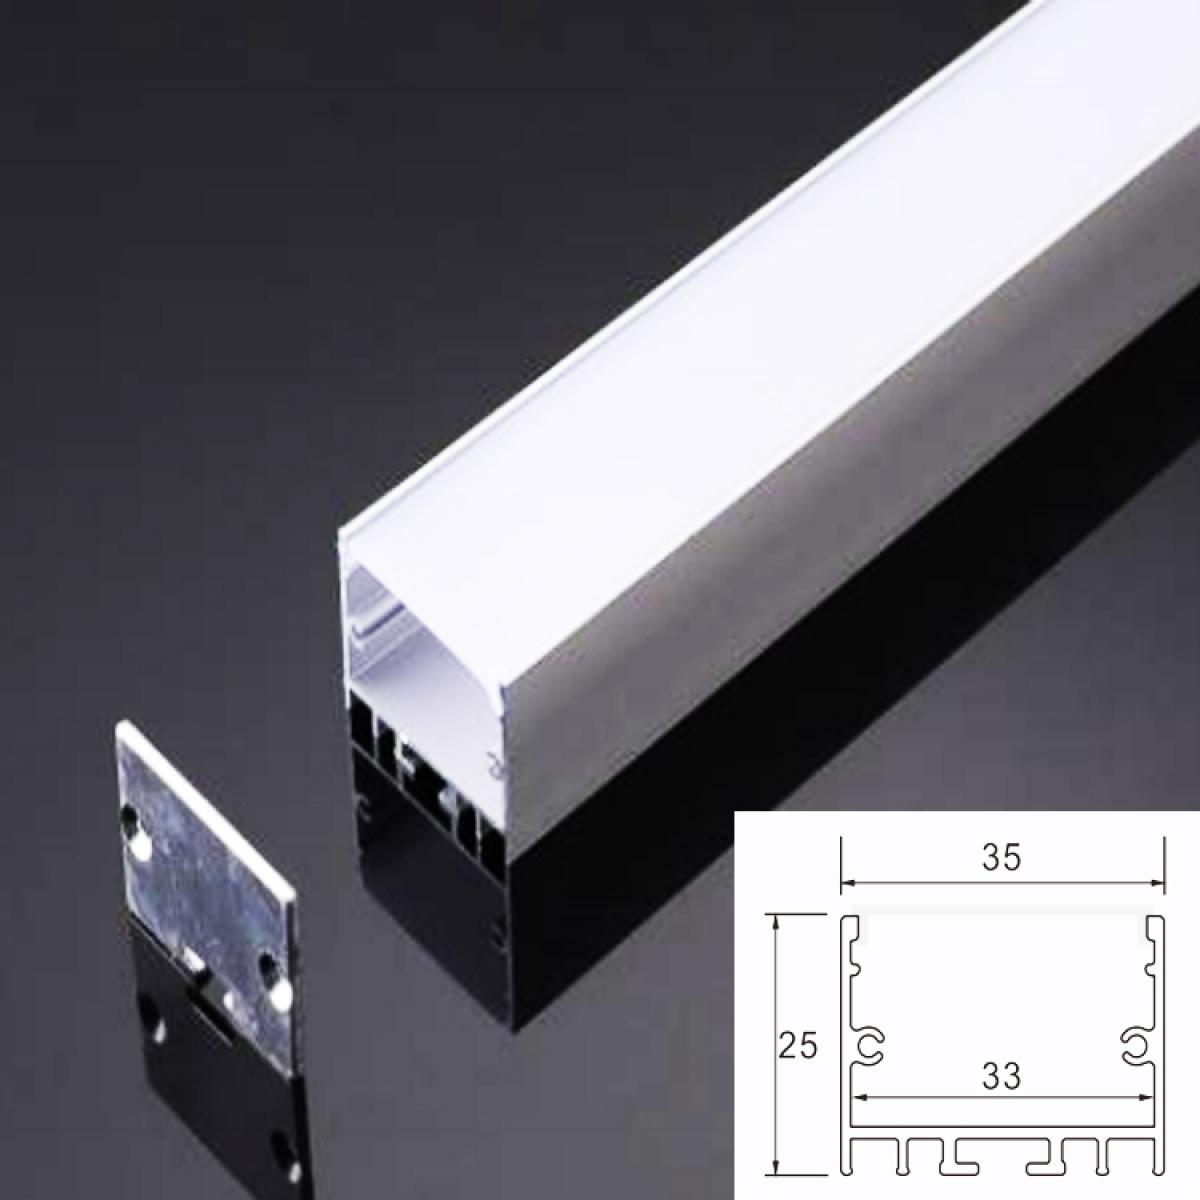 TXN-3525 LX35X25MM Surface Mounted Led Light Aluminium Profile For Led Strips Diffuser, Led Extruded Aluminium Channel